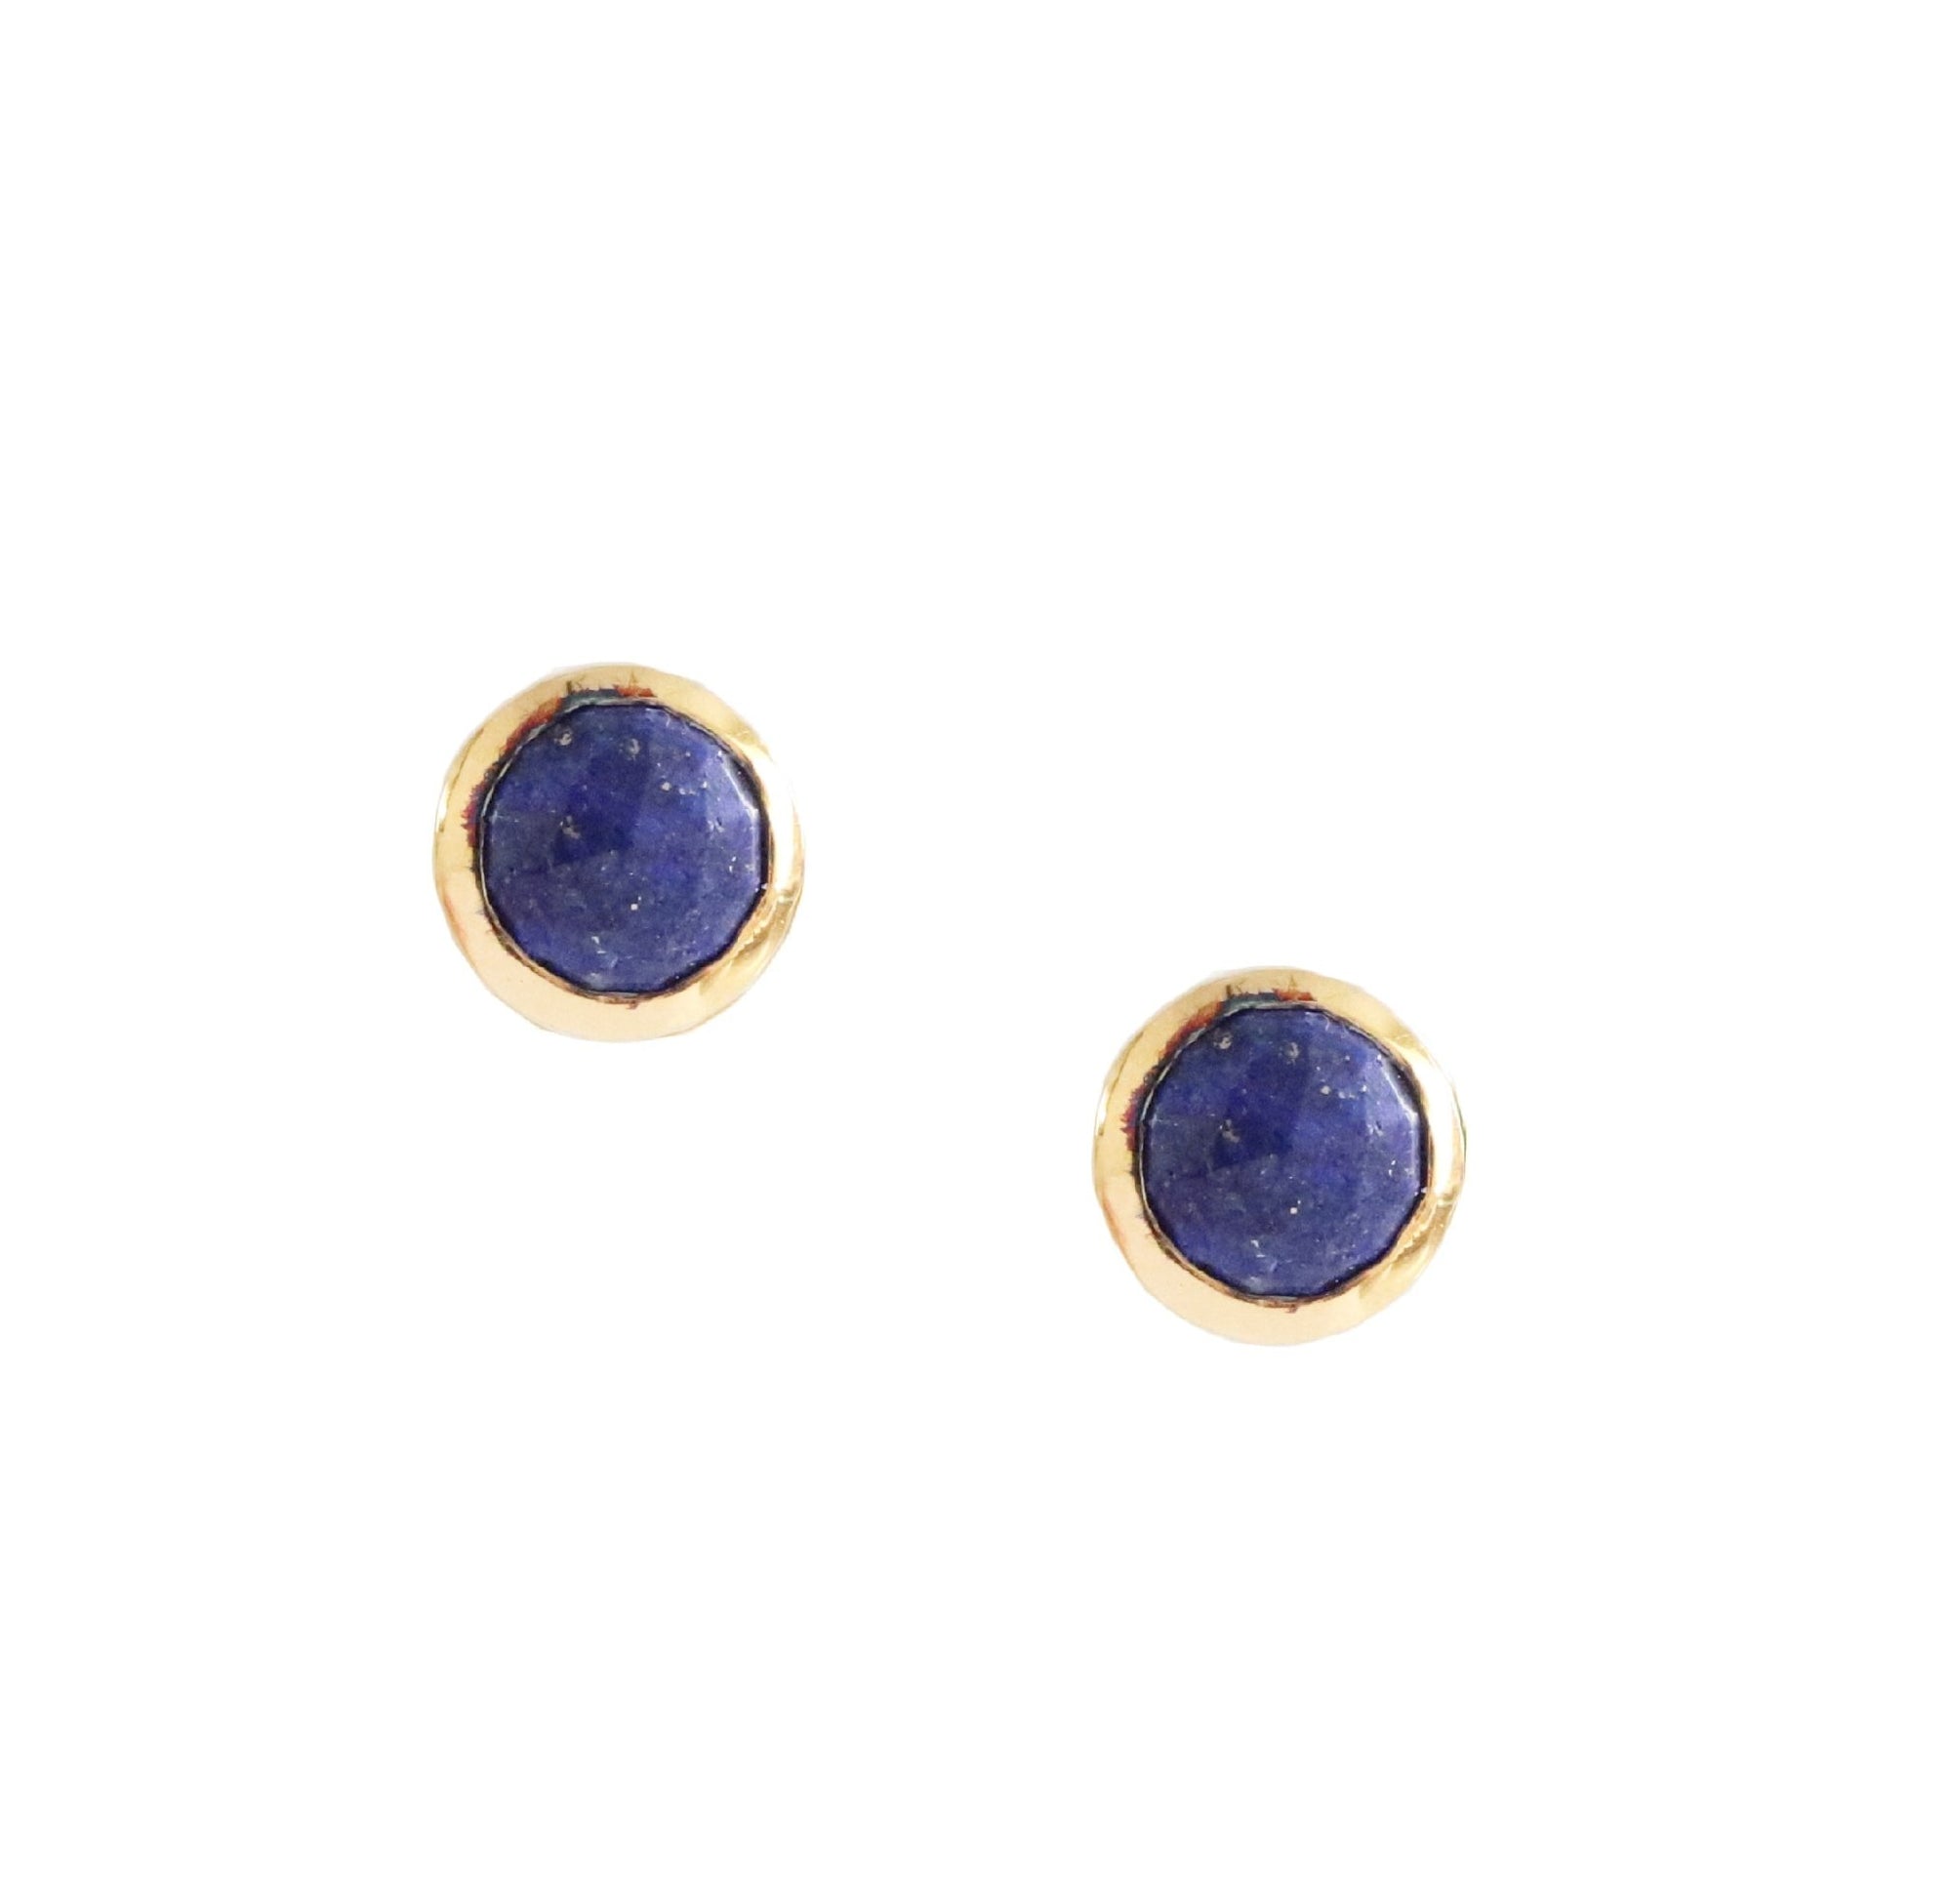 DAINTY LEGACY STUDS - LAPIS & GOLD - SO PRETTY CARA COTTER